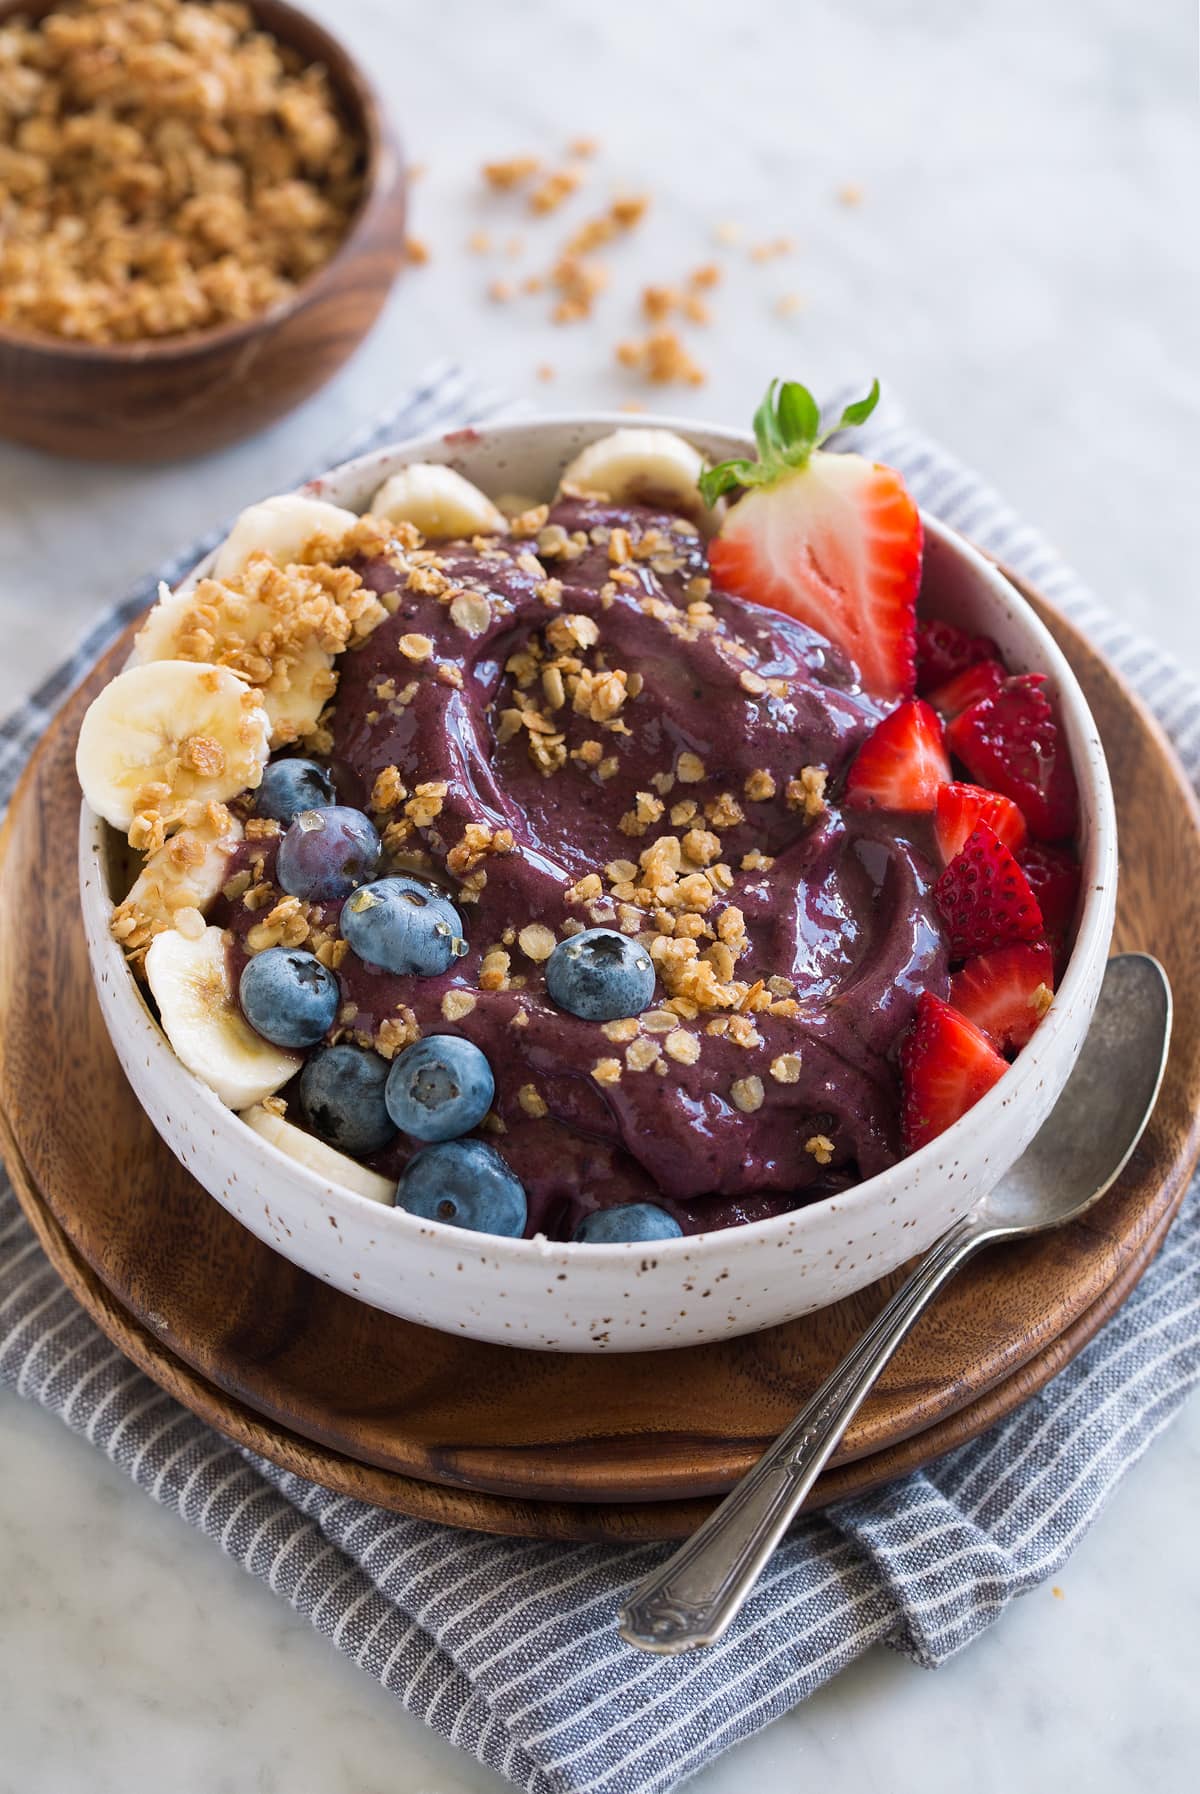 Thick acai bowl topped with strawberries, blueberries, bananas, granola and honey. Bowl is set over a wooden plate and a grey striped napkin.